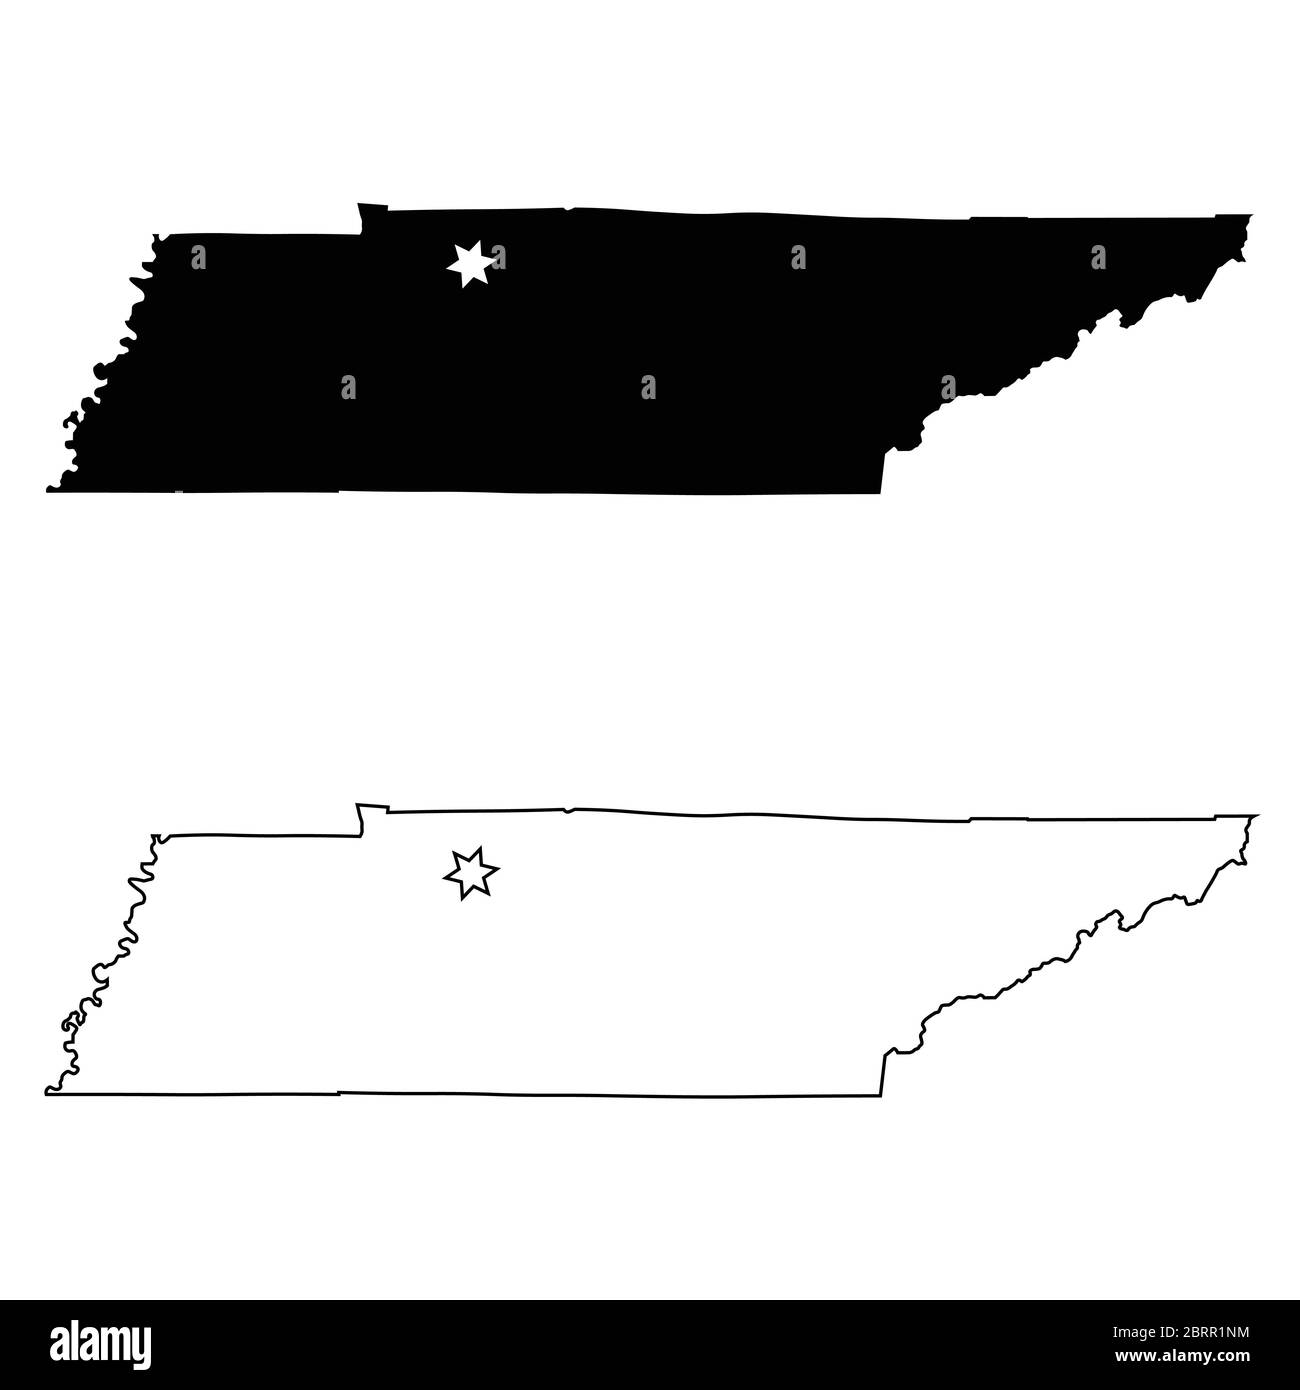 Tennessee TN state Map USA with Capital City Star at Nashville. Black silhouette and outline isolated maps on a white background. EPS Vector Stock Vector